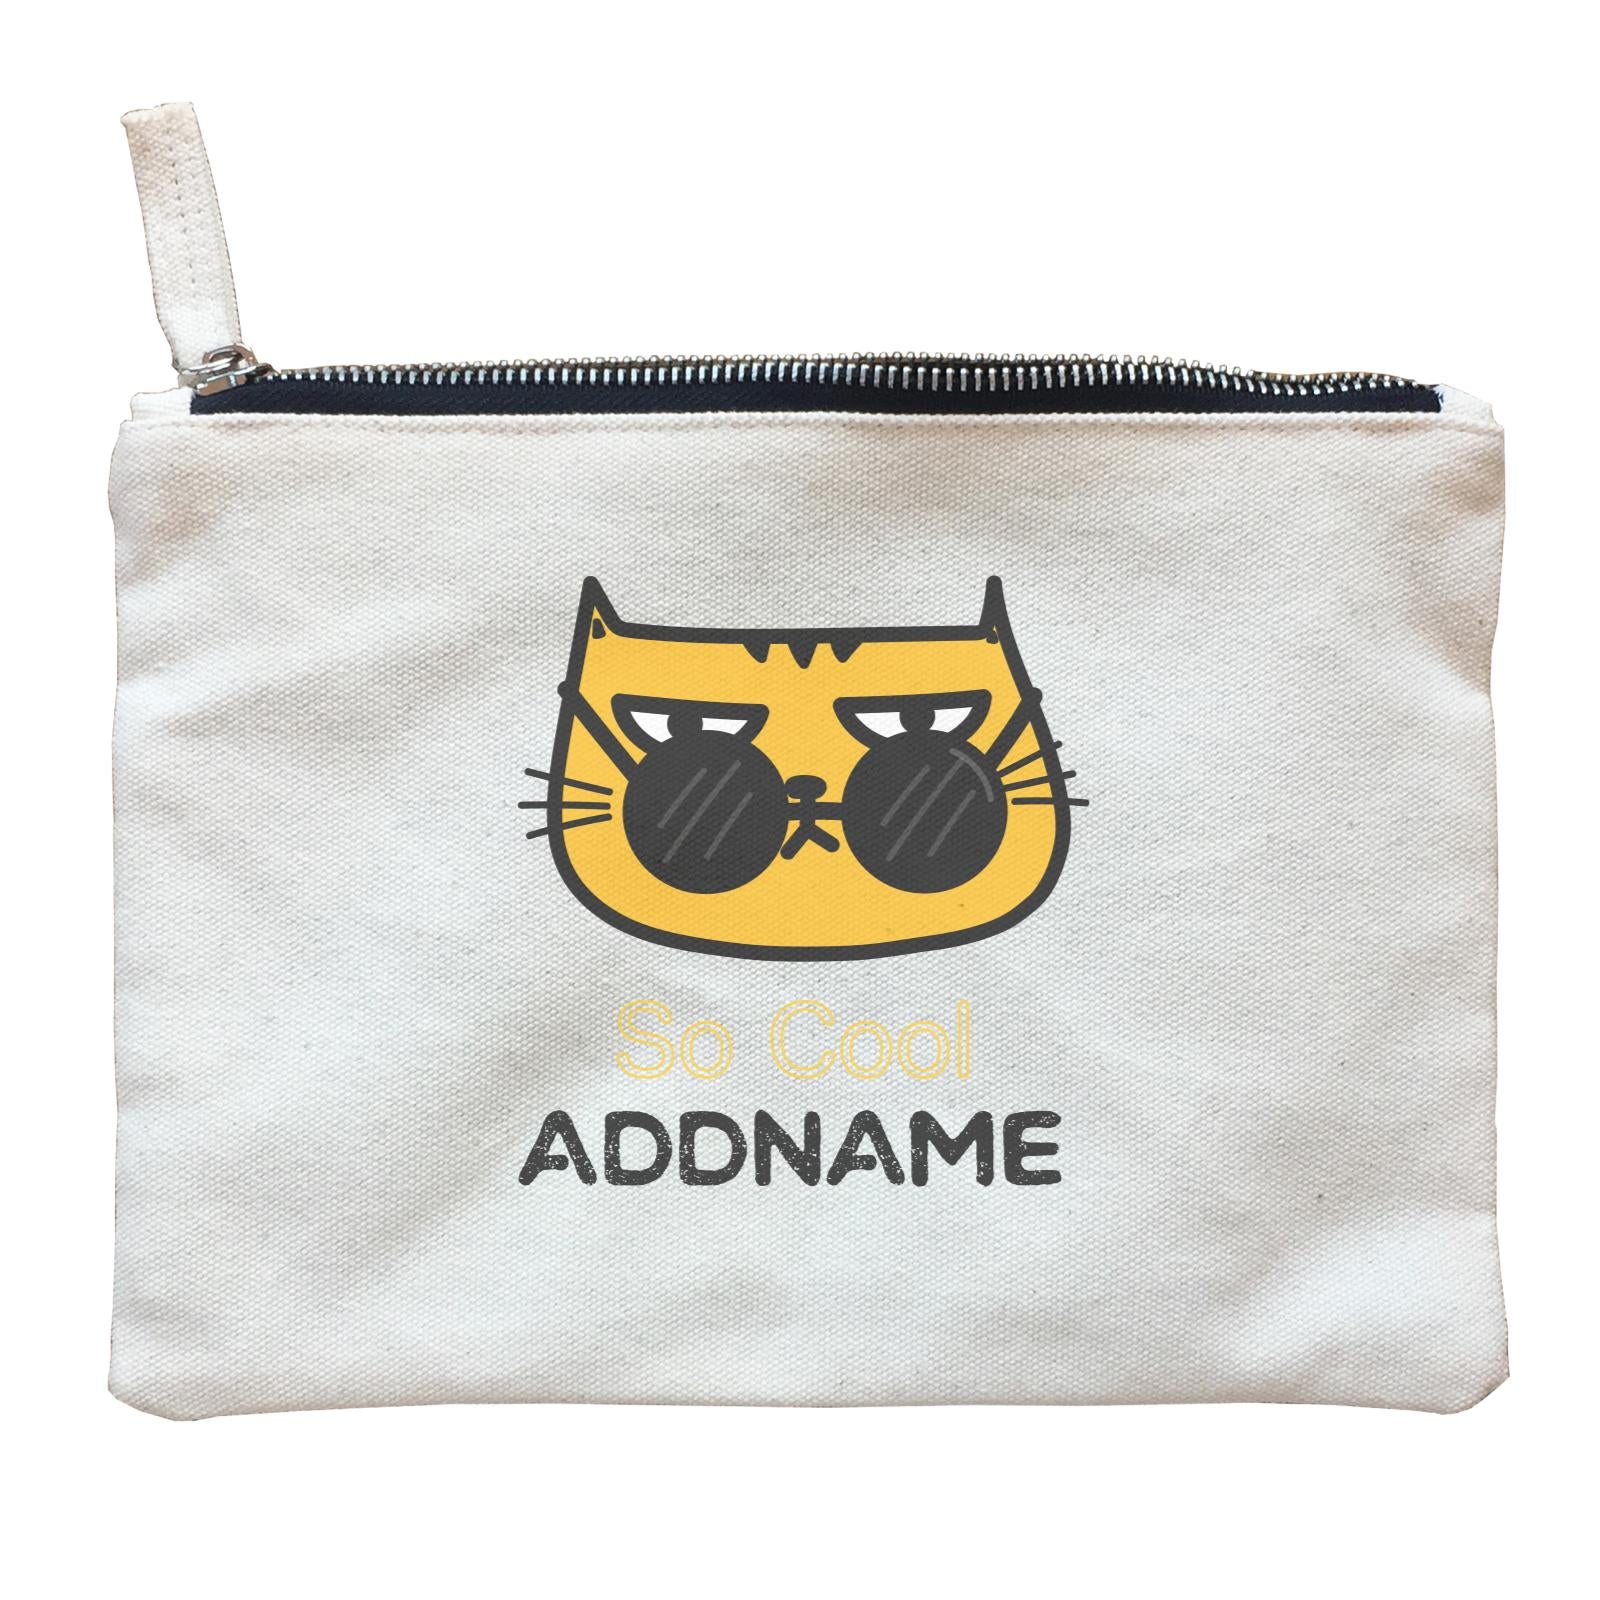 Cute Animals And Friends Series Cool Cat With Sunglasses Addname Zipper Pouch